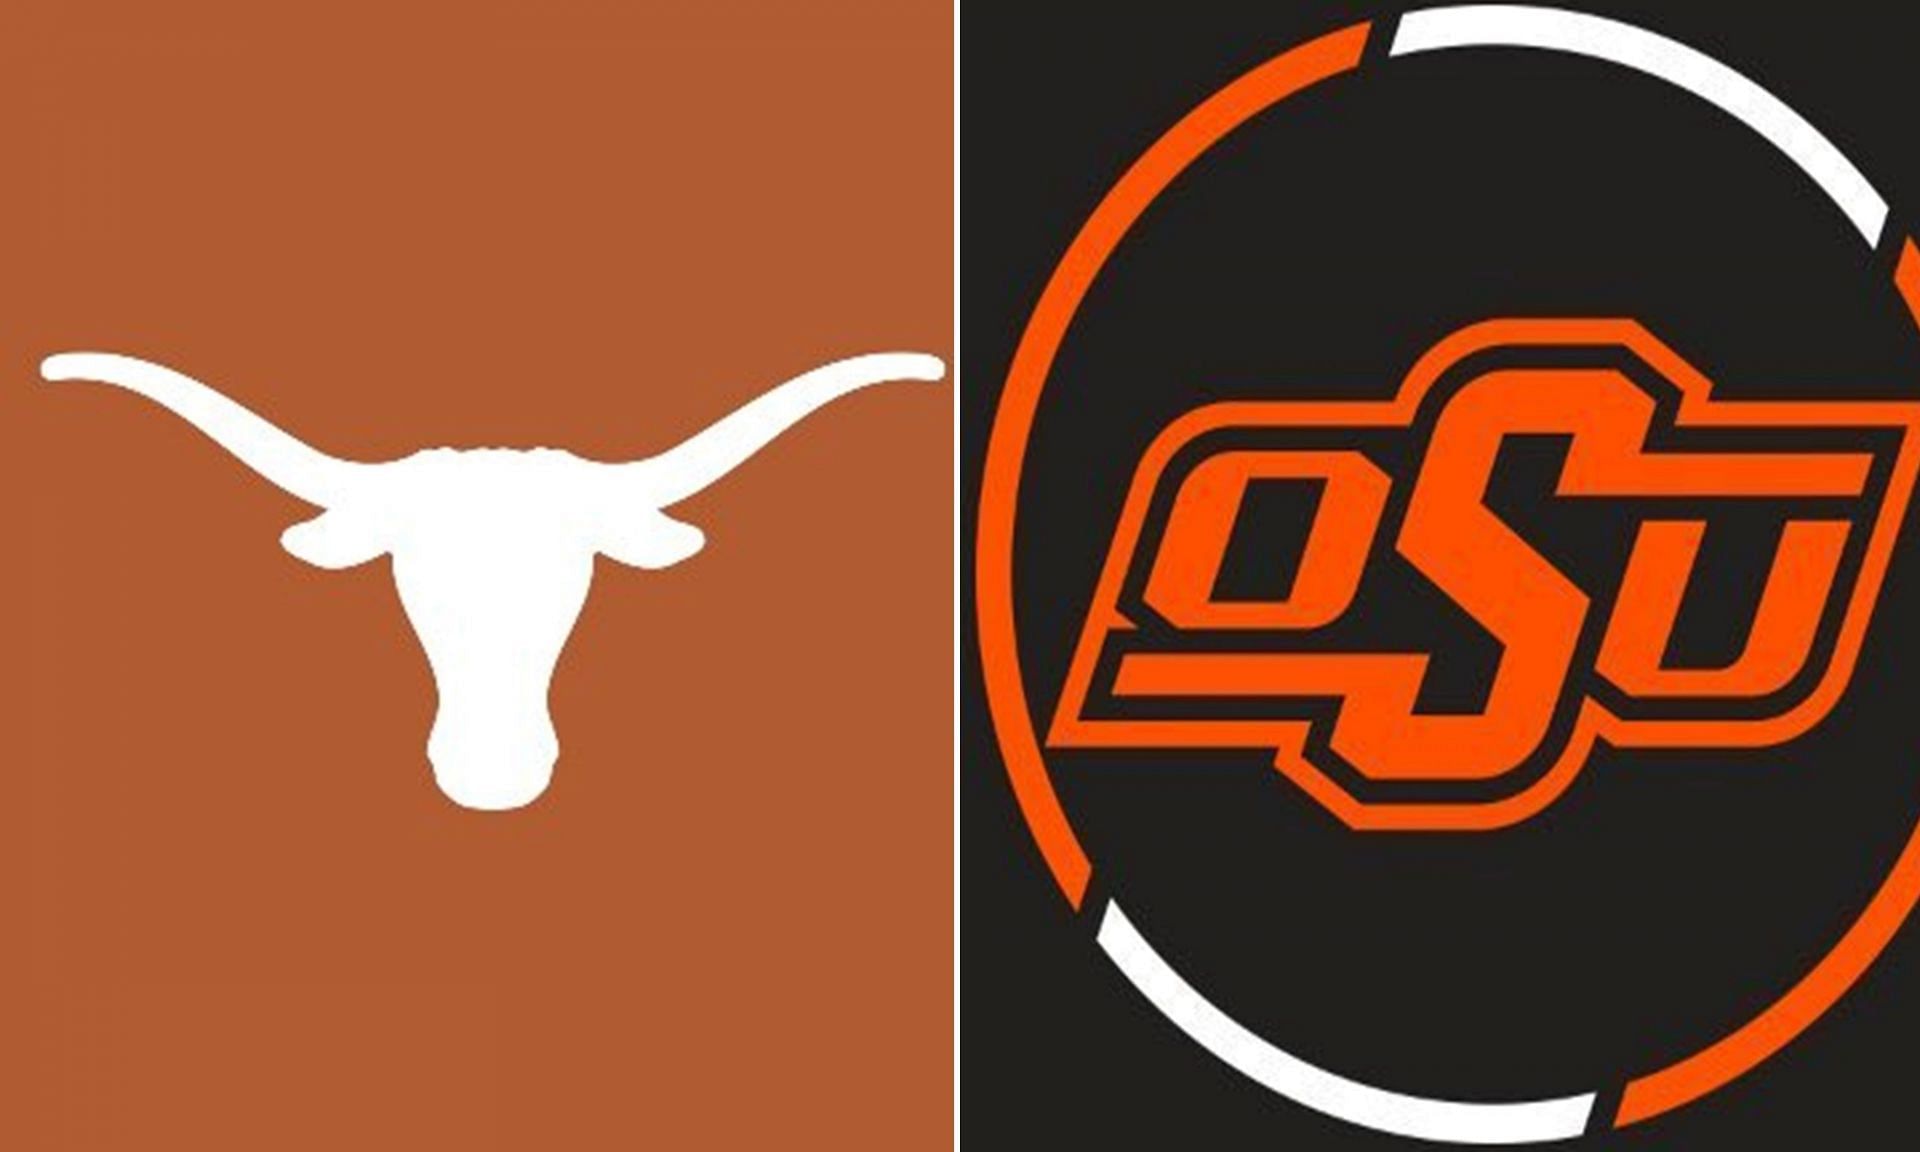 The Texas Longhorns will face the Oklahoma State Cowboys in the Big 12 Championship Game